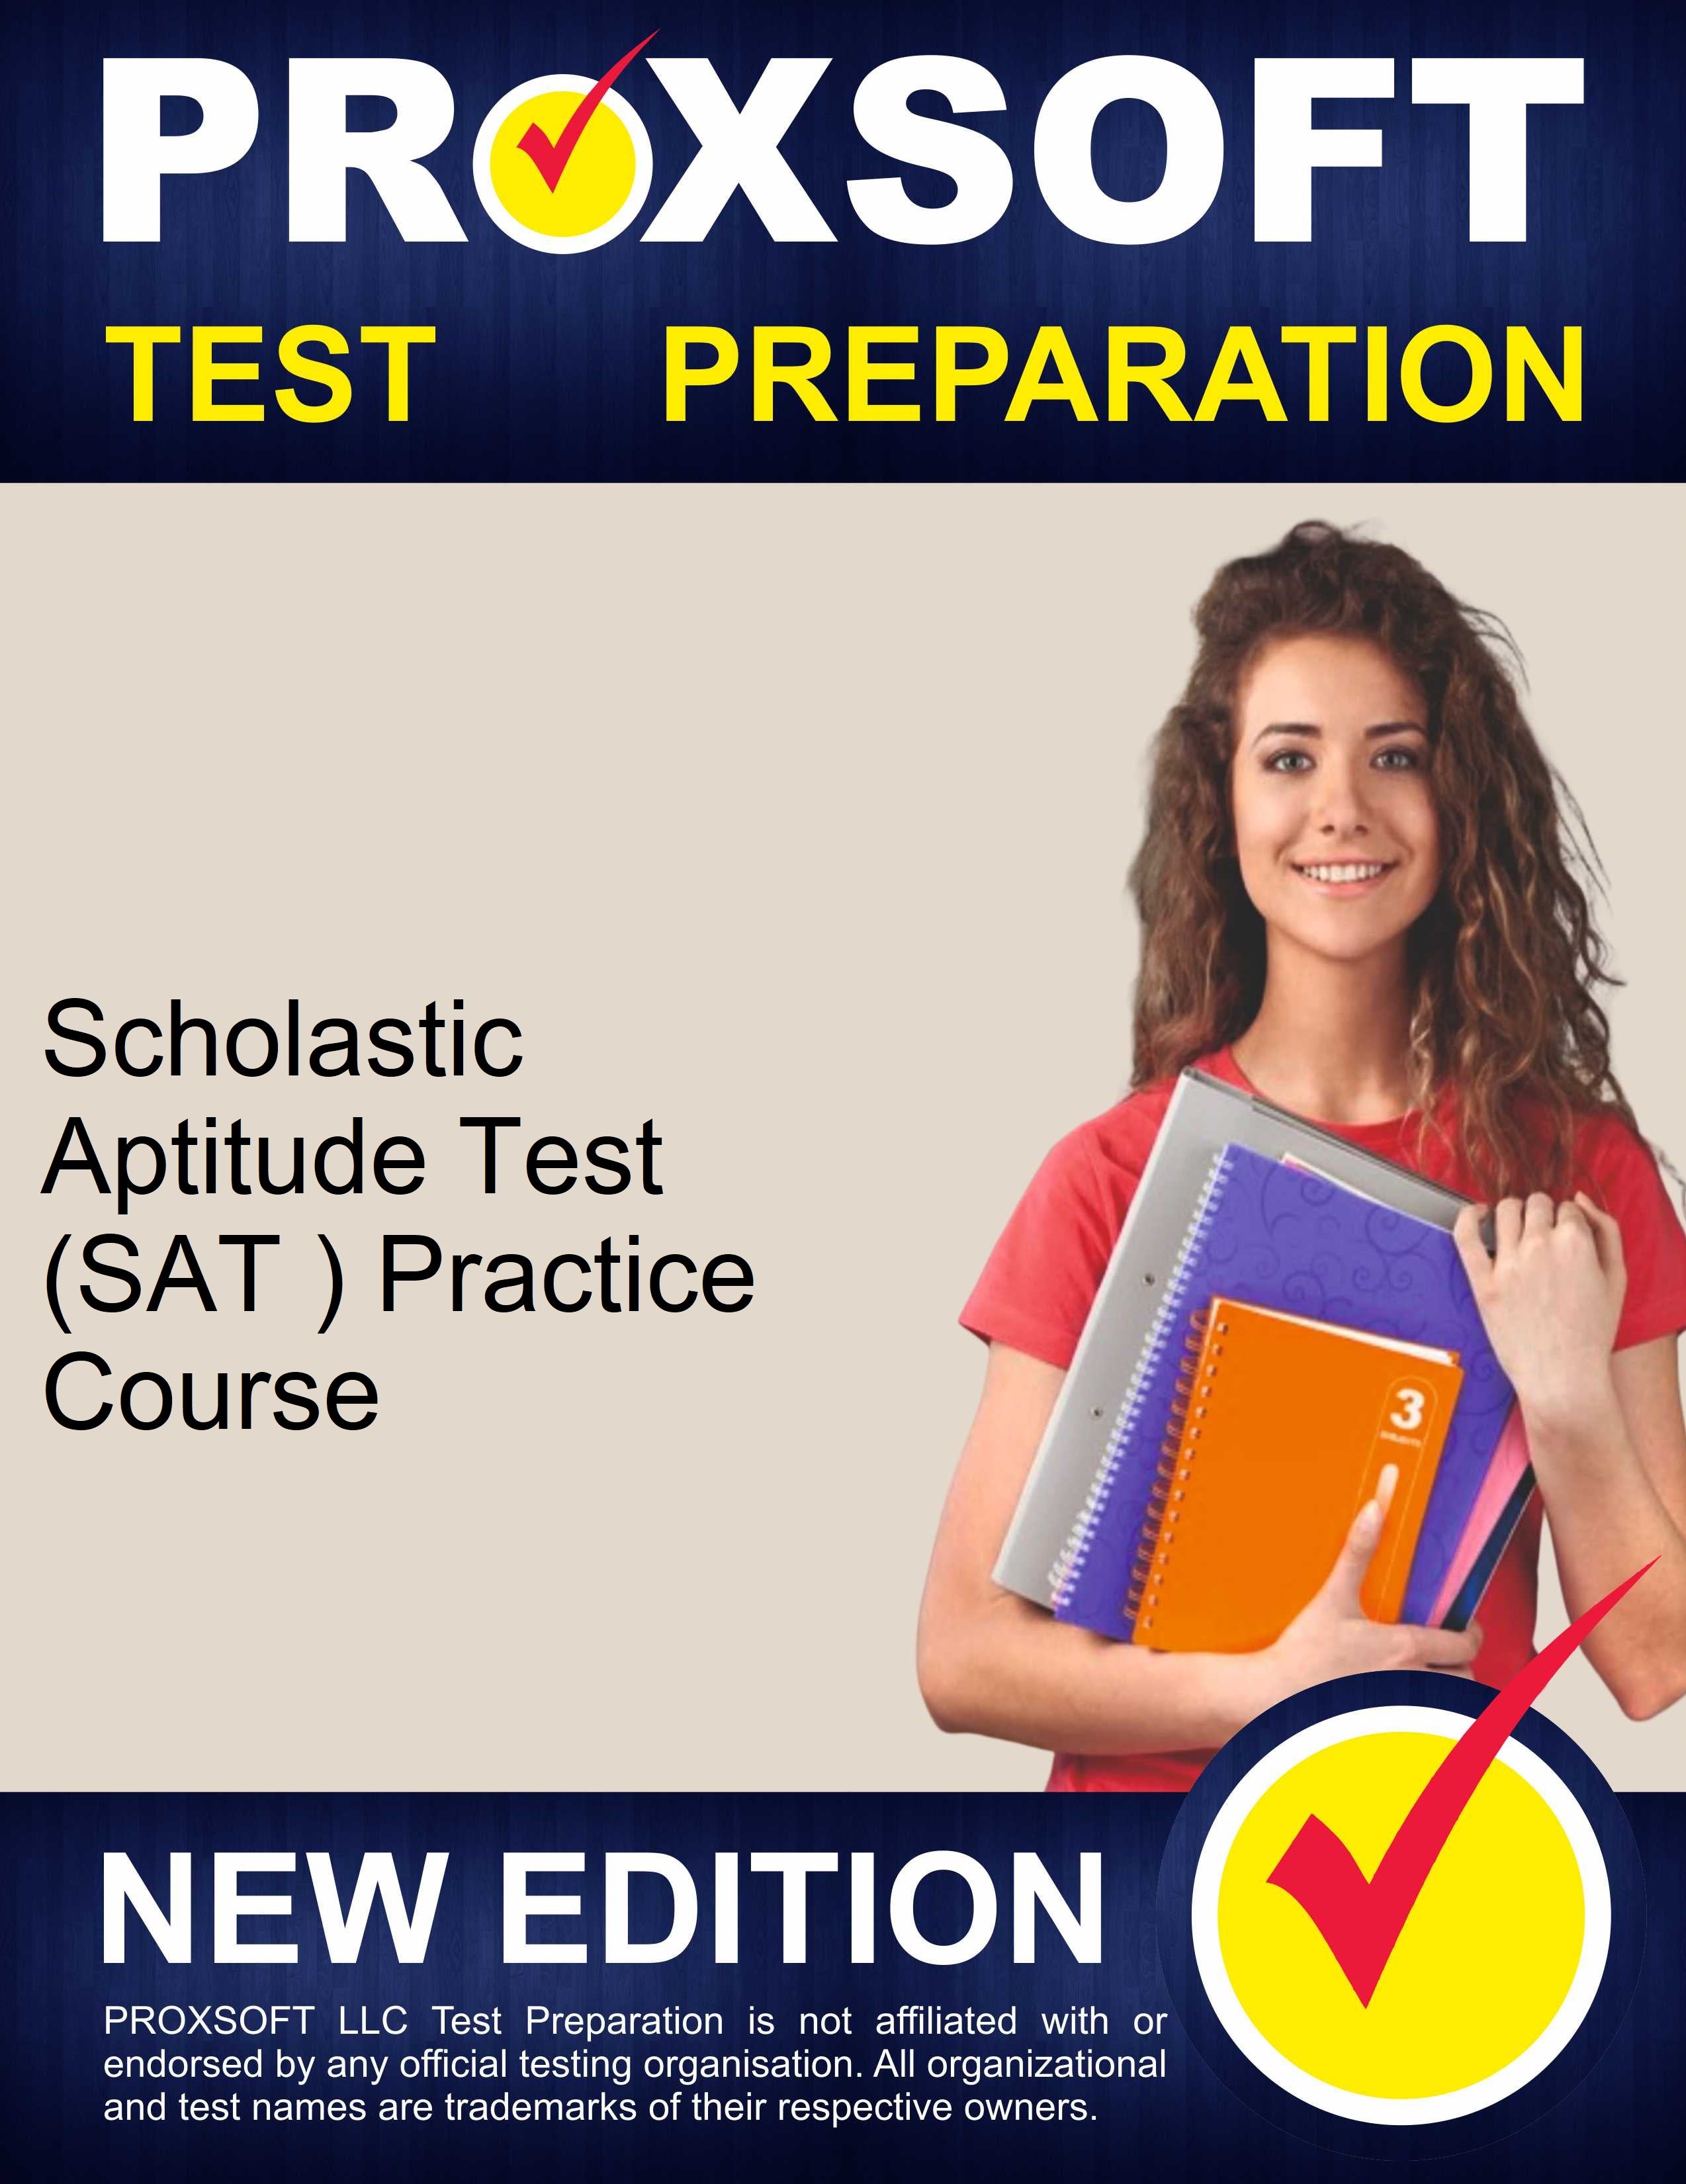 Solved The Scholastic Aptitude Test (SAT) contains three